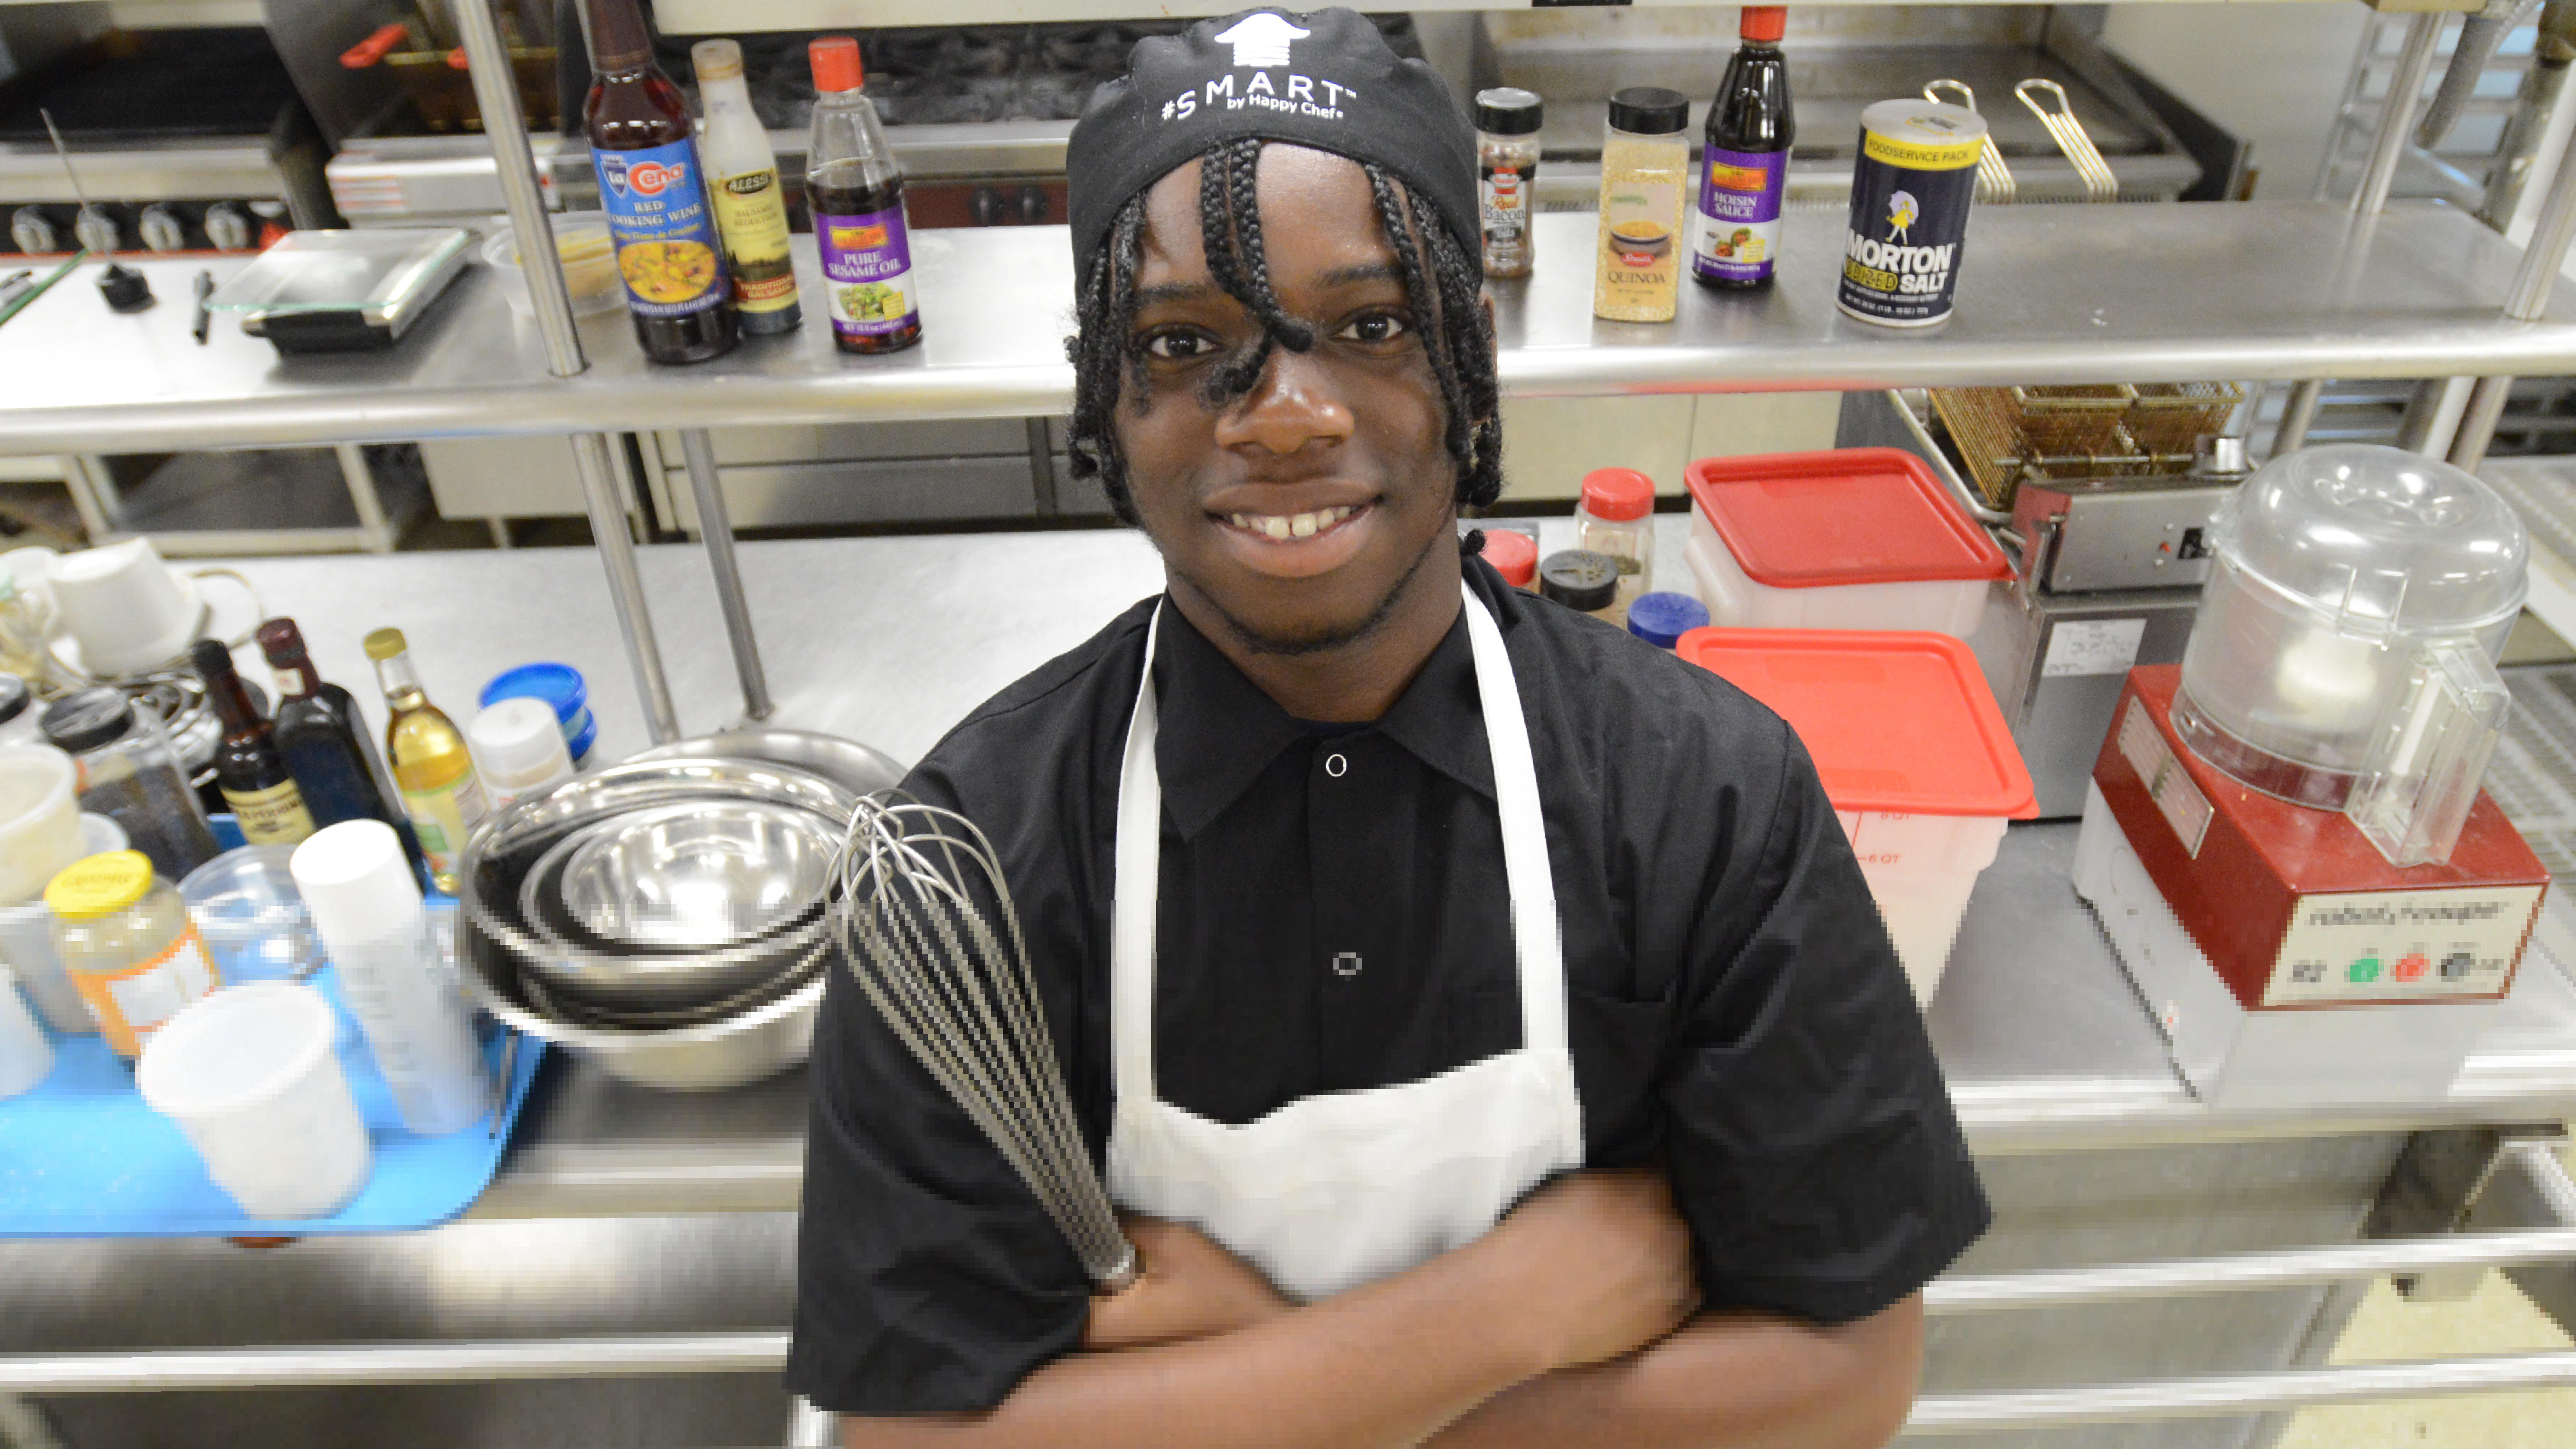 Culinary student posing in the kitchen.